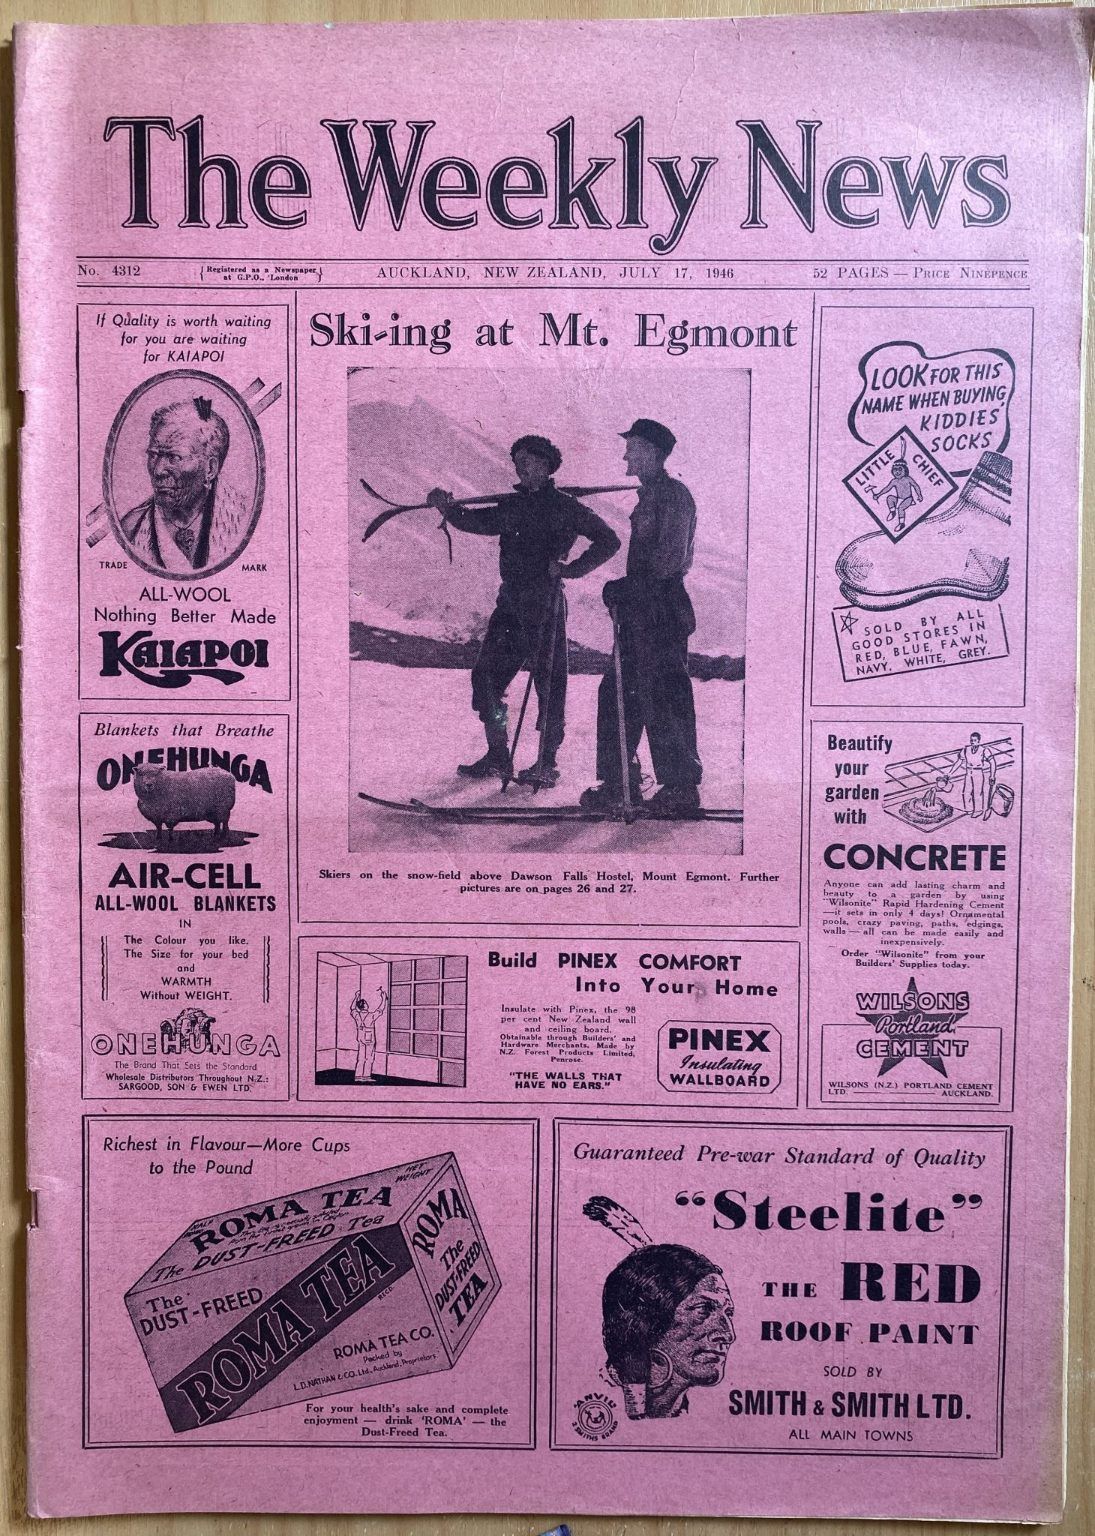 OLD NEWSPAPER: The Weekly News - No. 4312, 17 July 1946